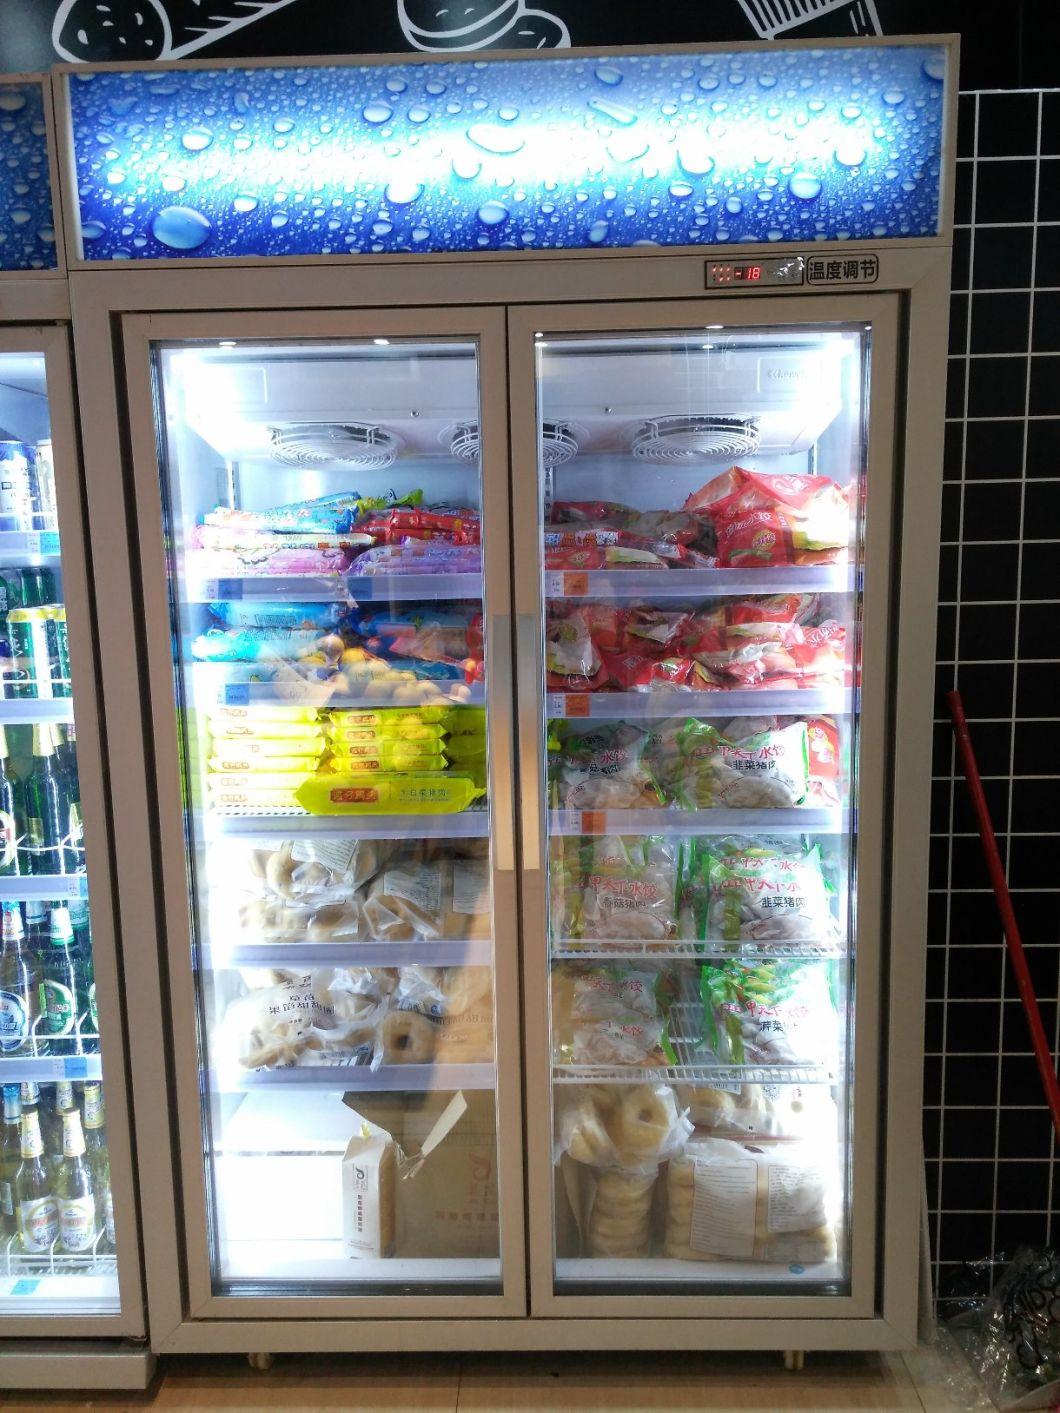 Green&Health Commercial 3 Glass Doors Upright Display Freezer Showcase for Supermarket